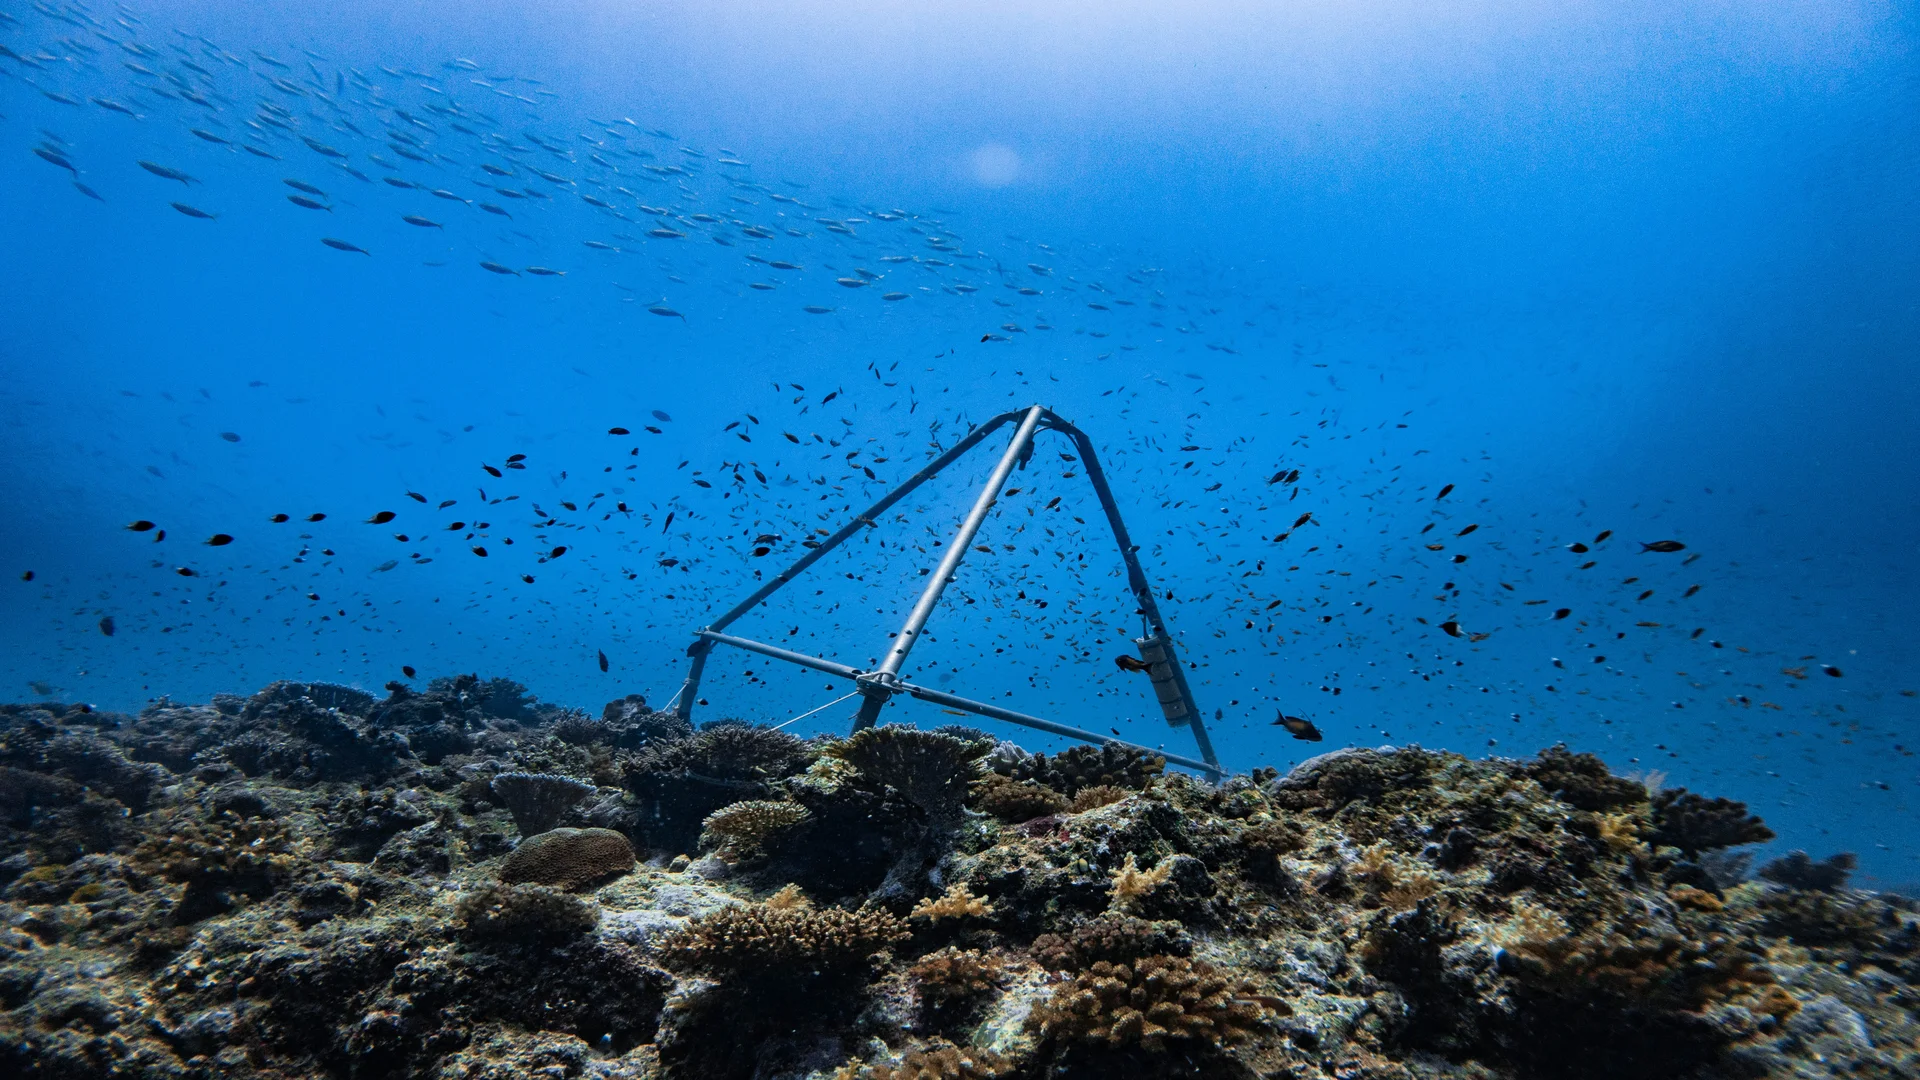 Tripod installed in the seabed with a school of fish